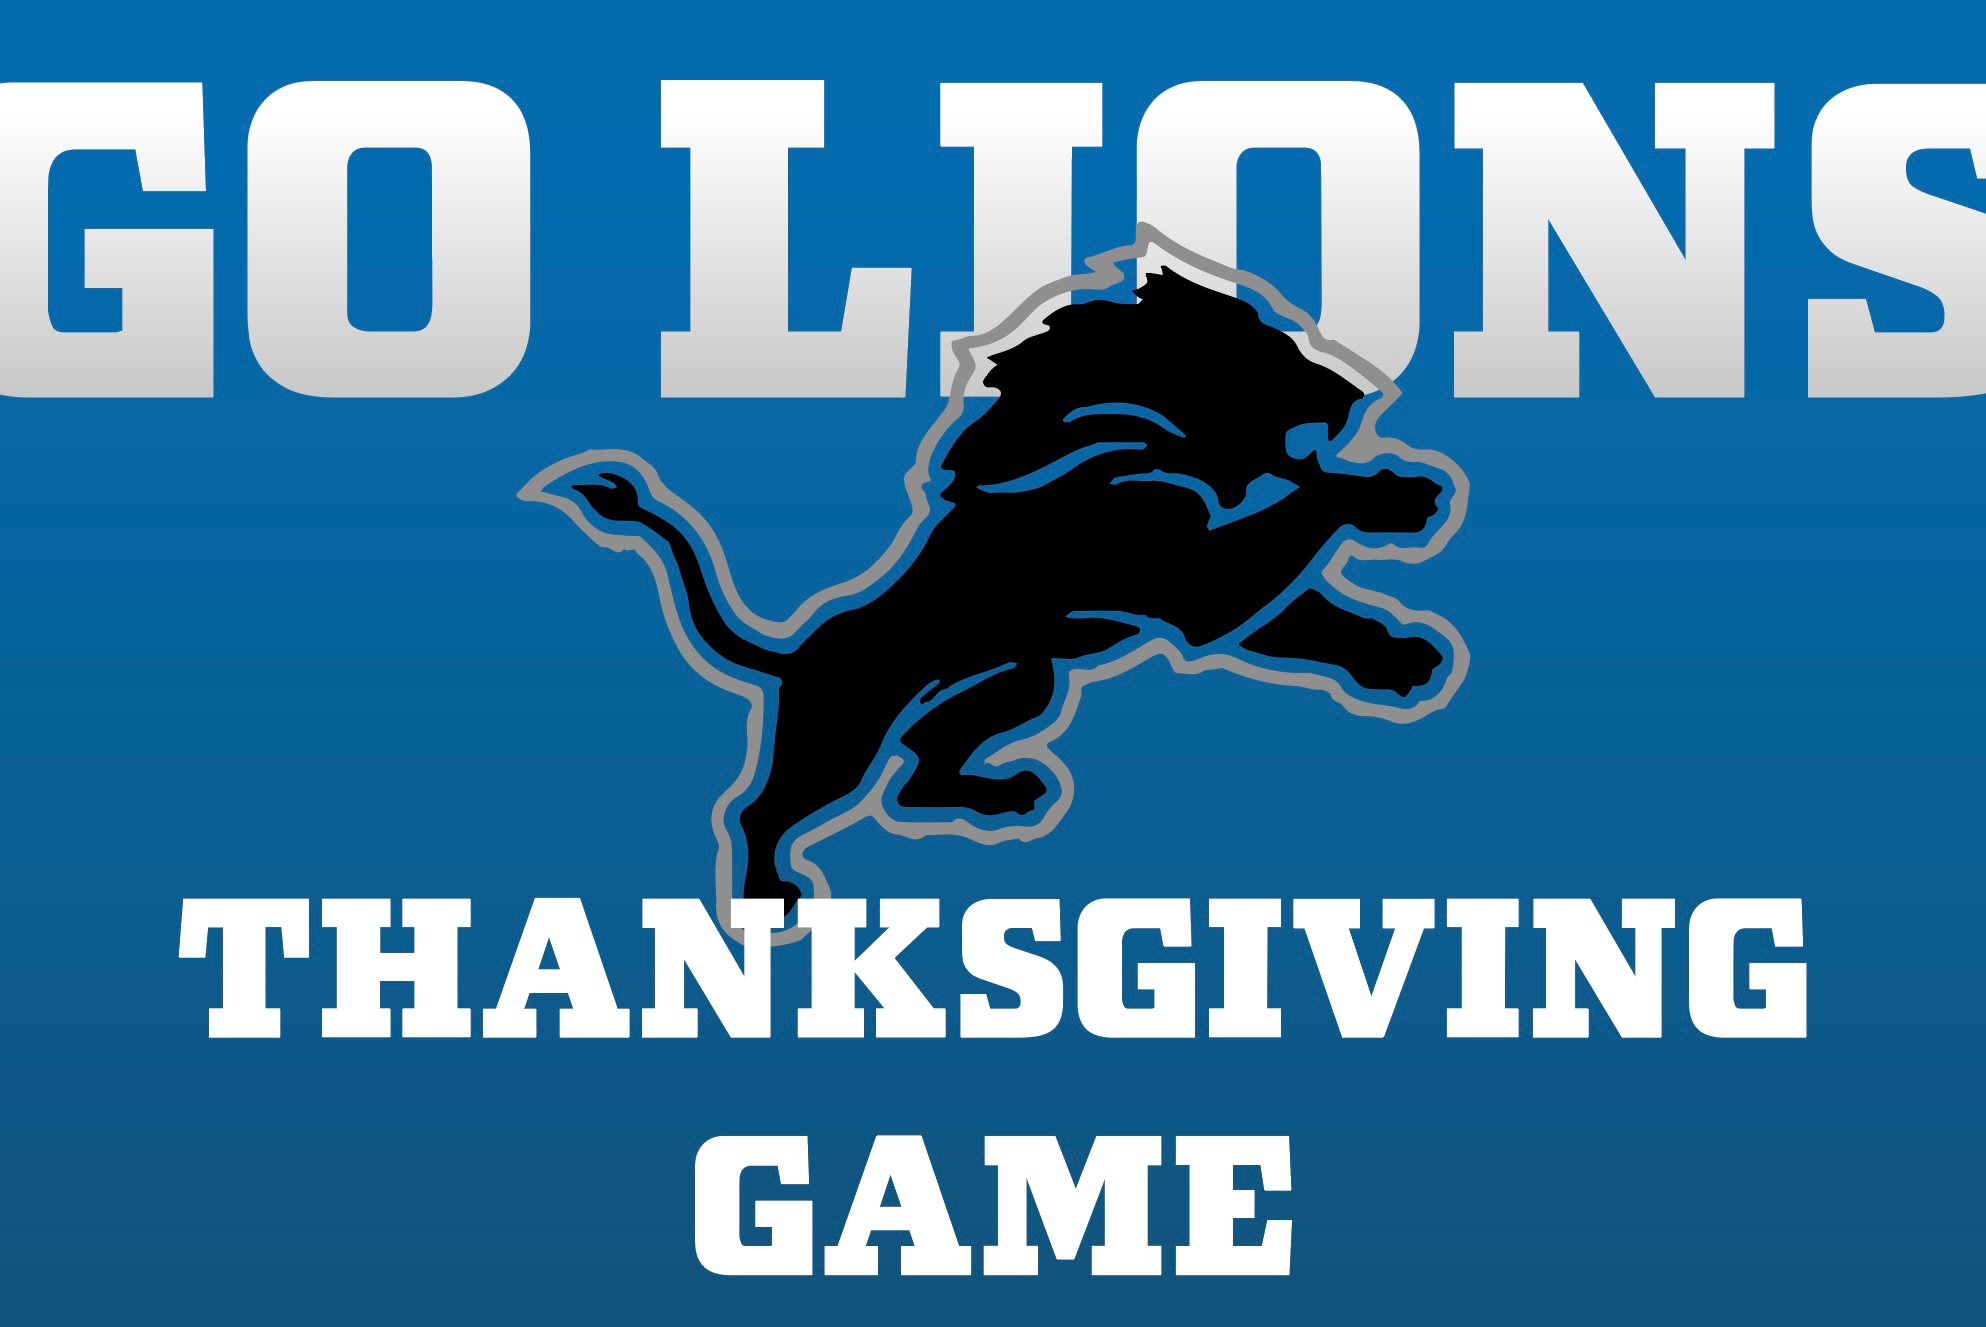 time of lions game on thanksgiving